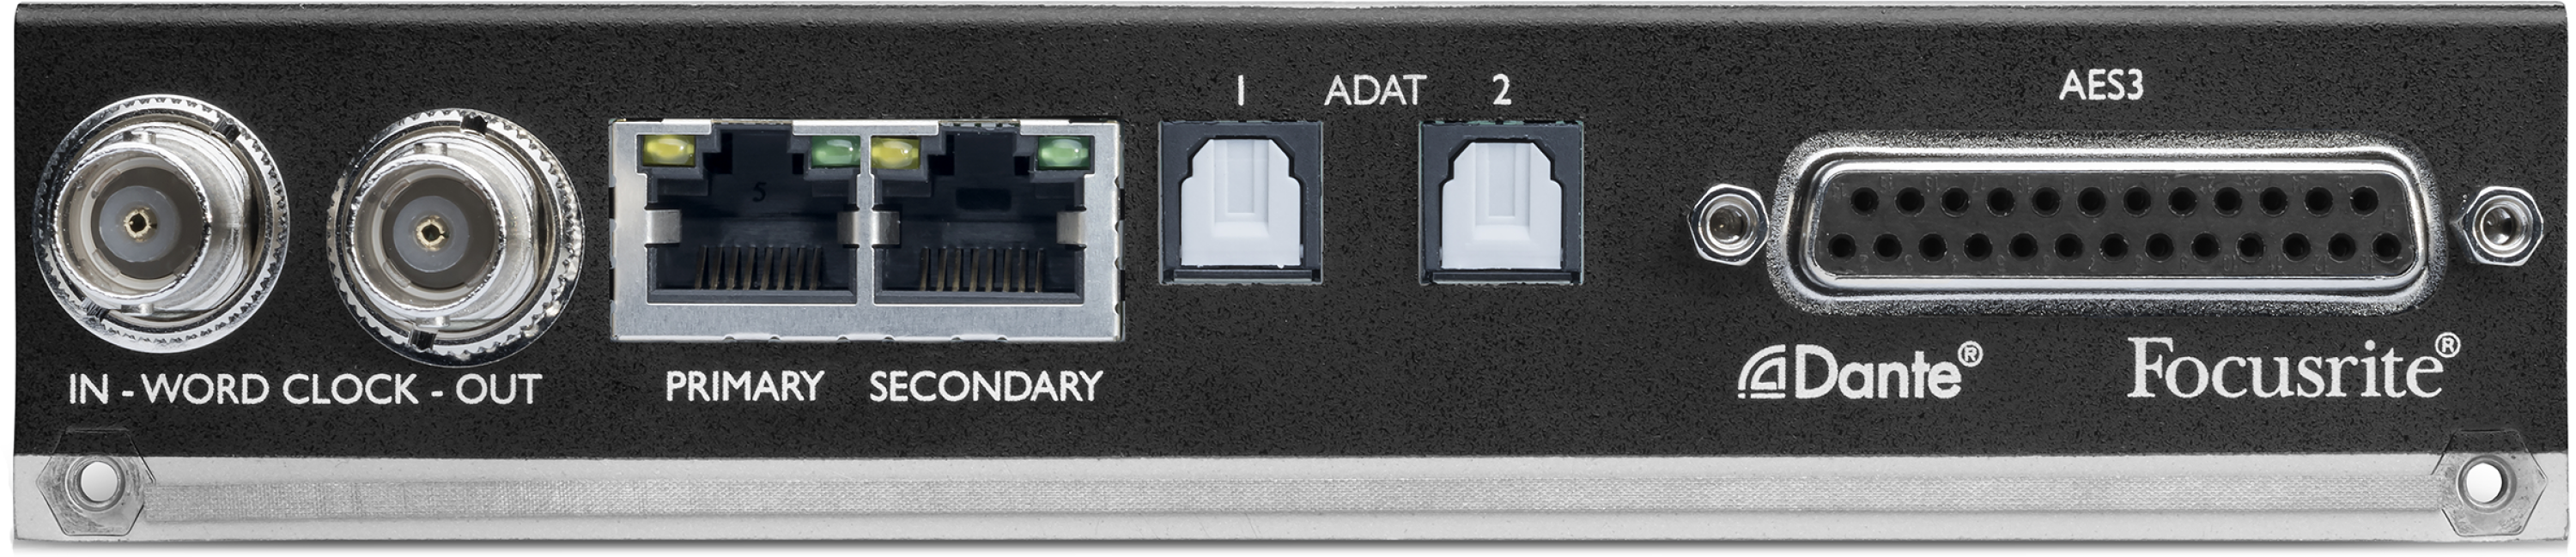 Focusrite ISA ADN8 8-channel A/D Card | Sweetwater